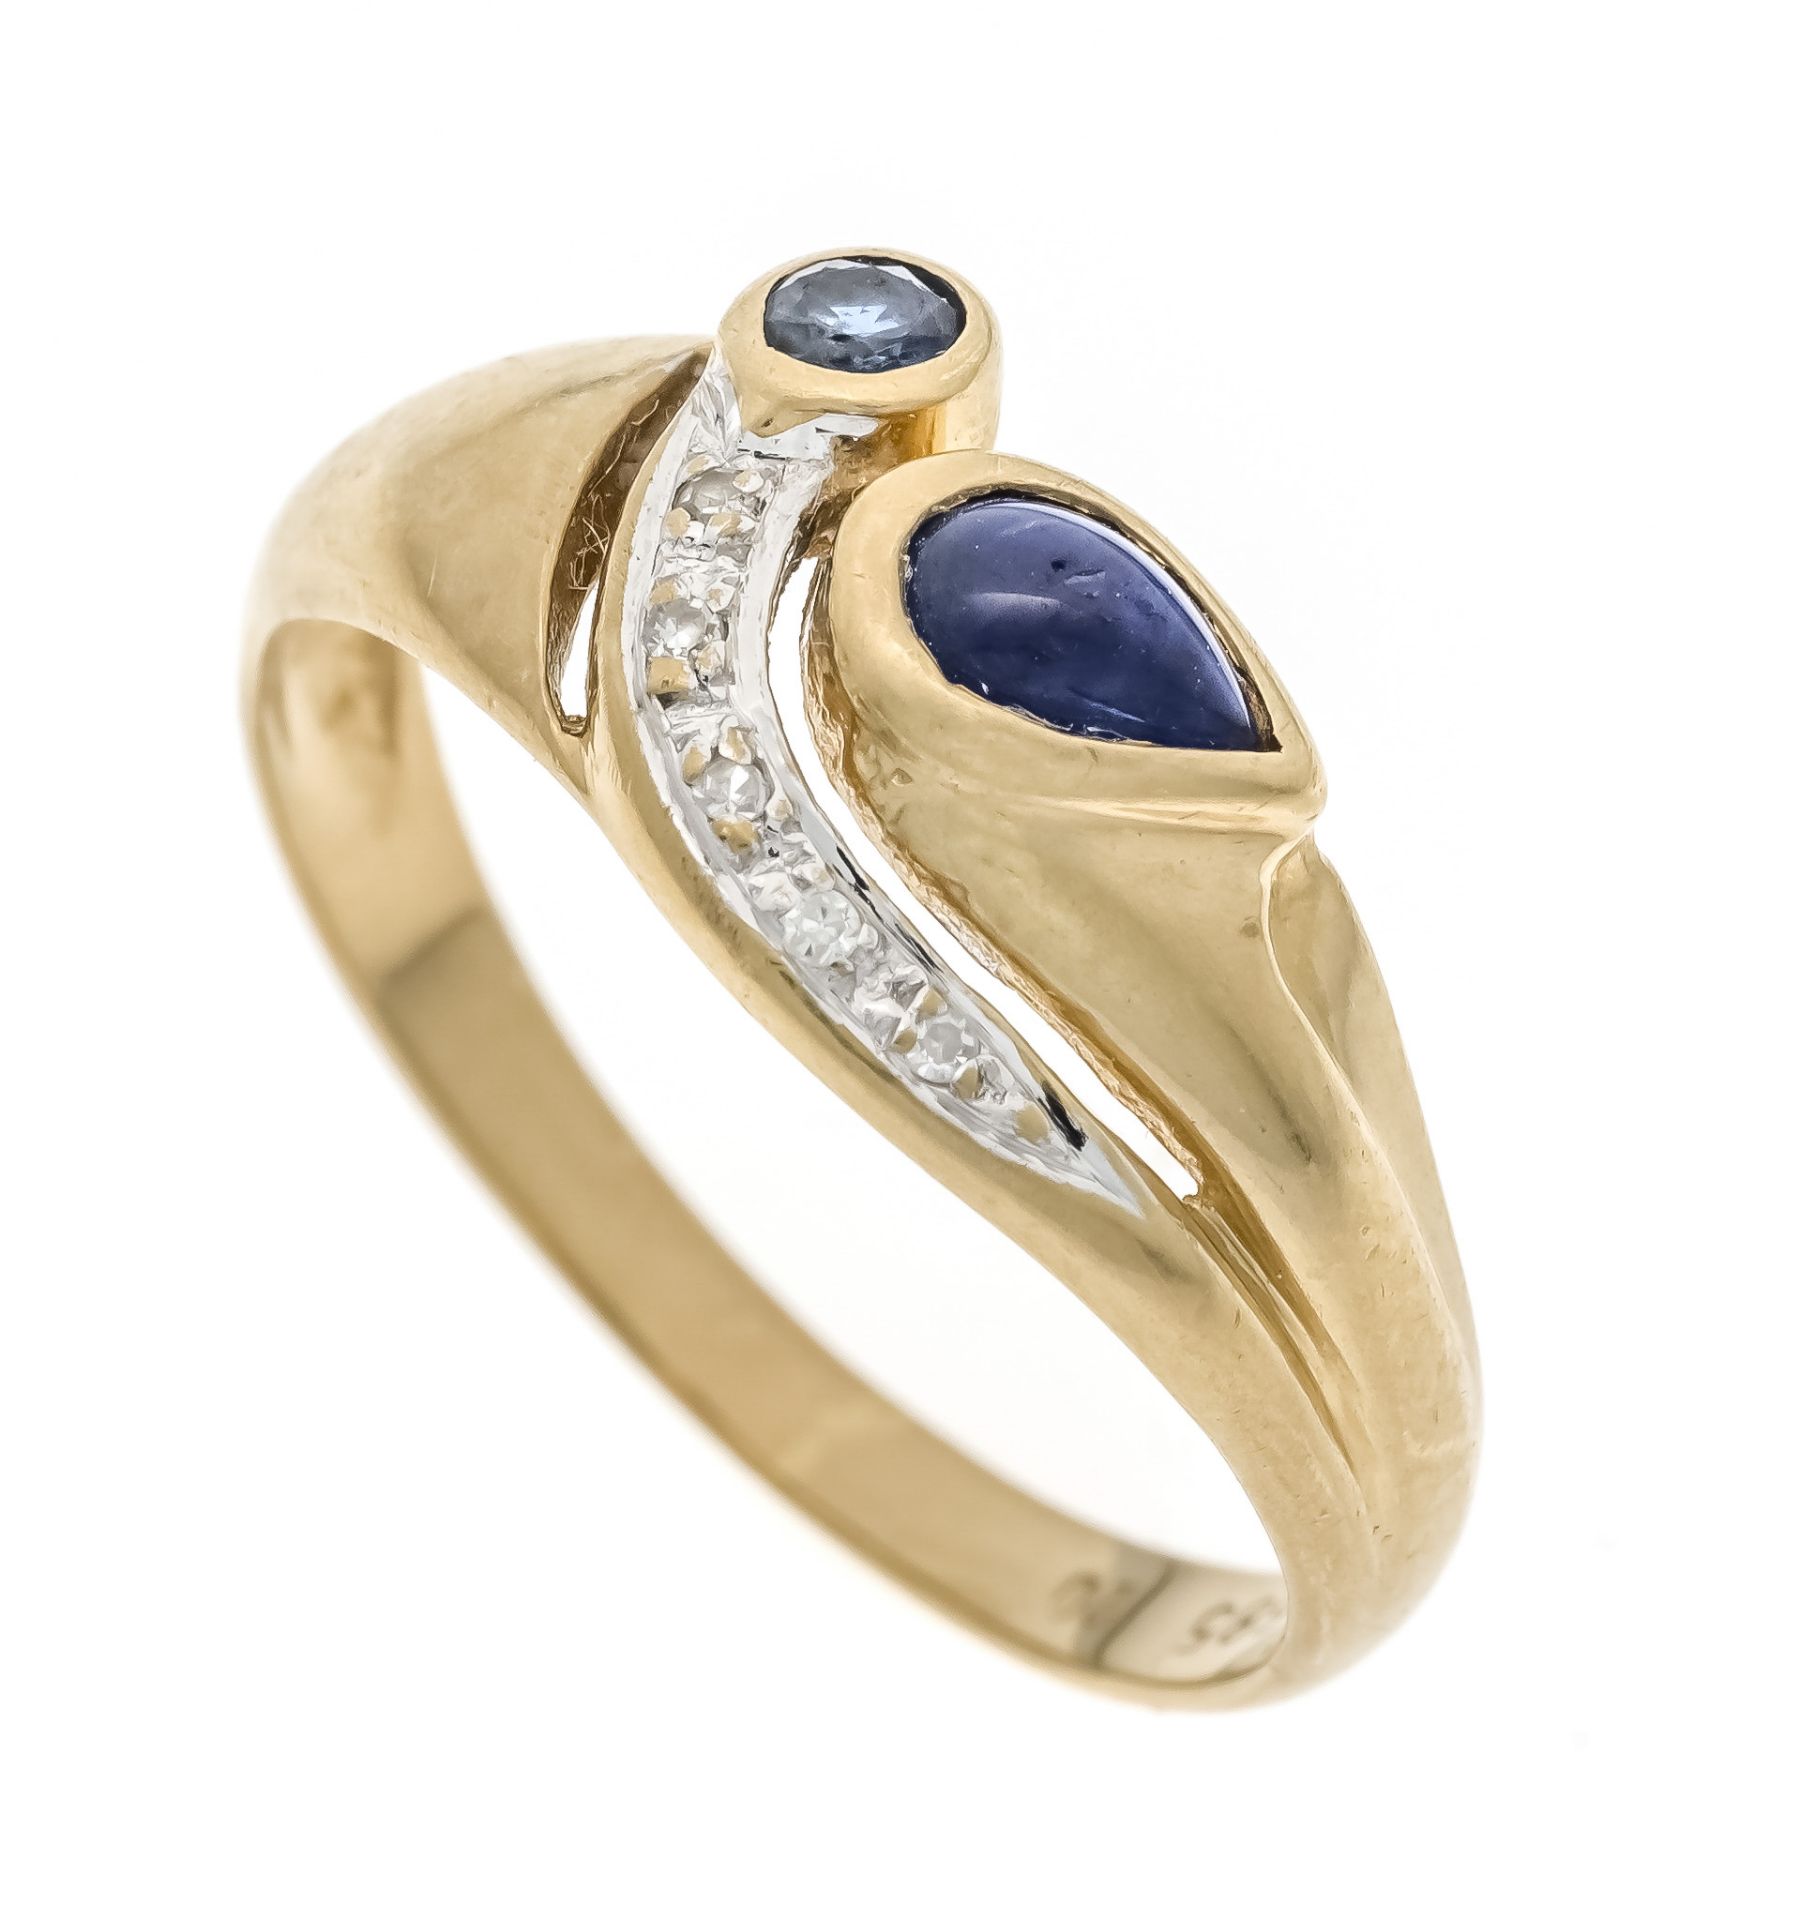 Sapphire-brilliant ring GG/WG 585/000 with a drop-shaped sapphire cabochon 5.2 x 3.2 mm and a